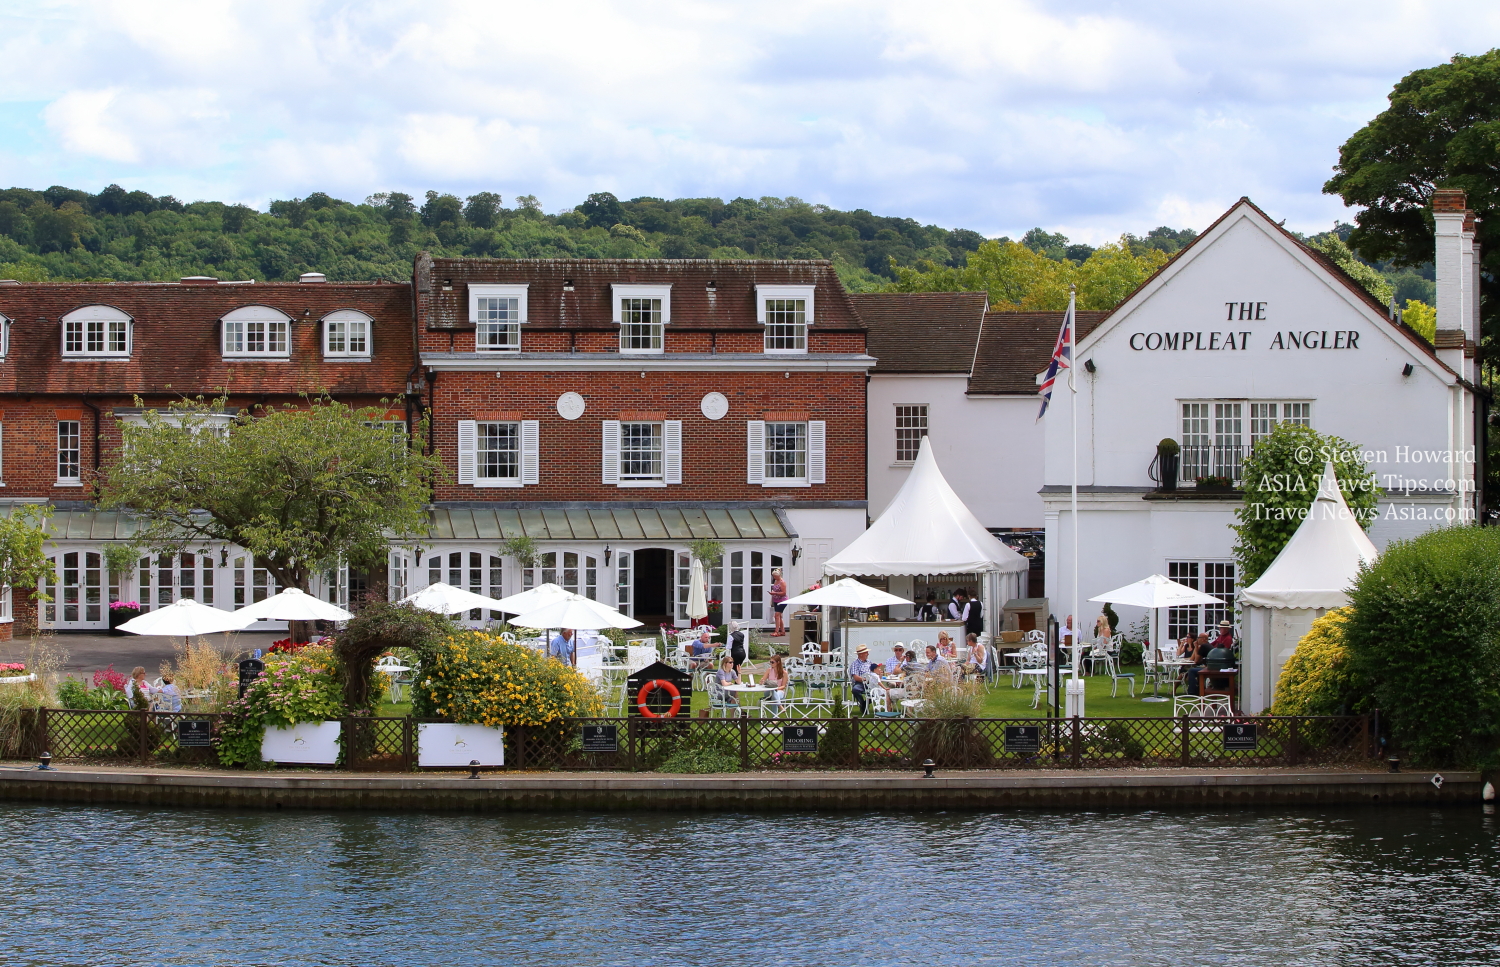 The Compleat Angler luxury hotel in Marlow, England